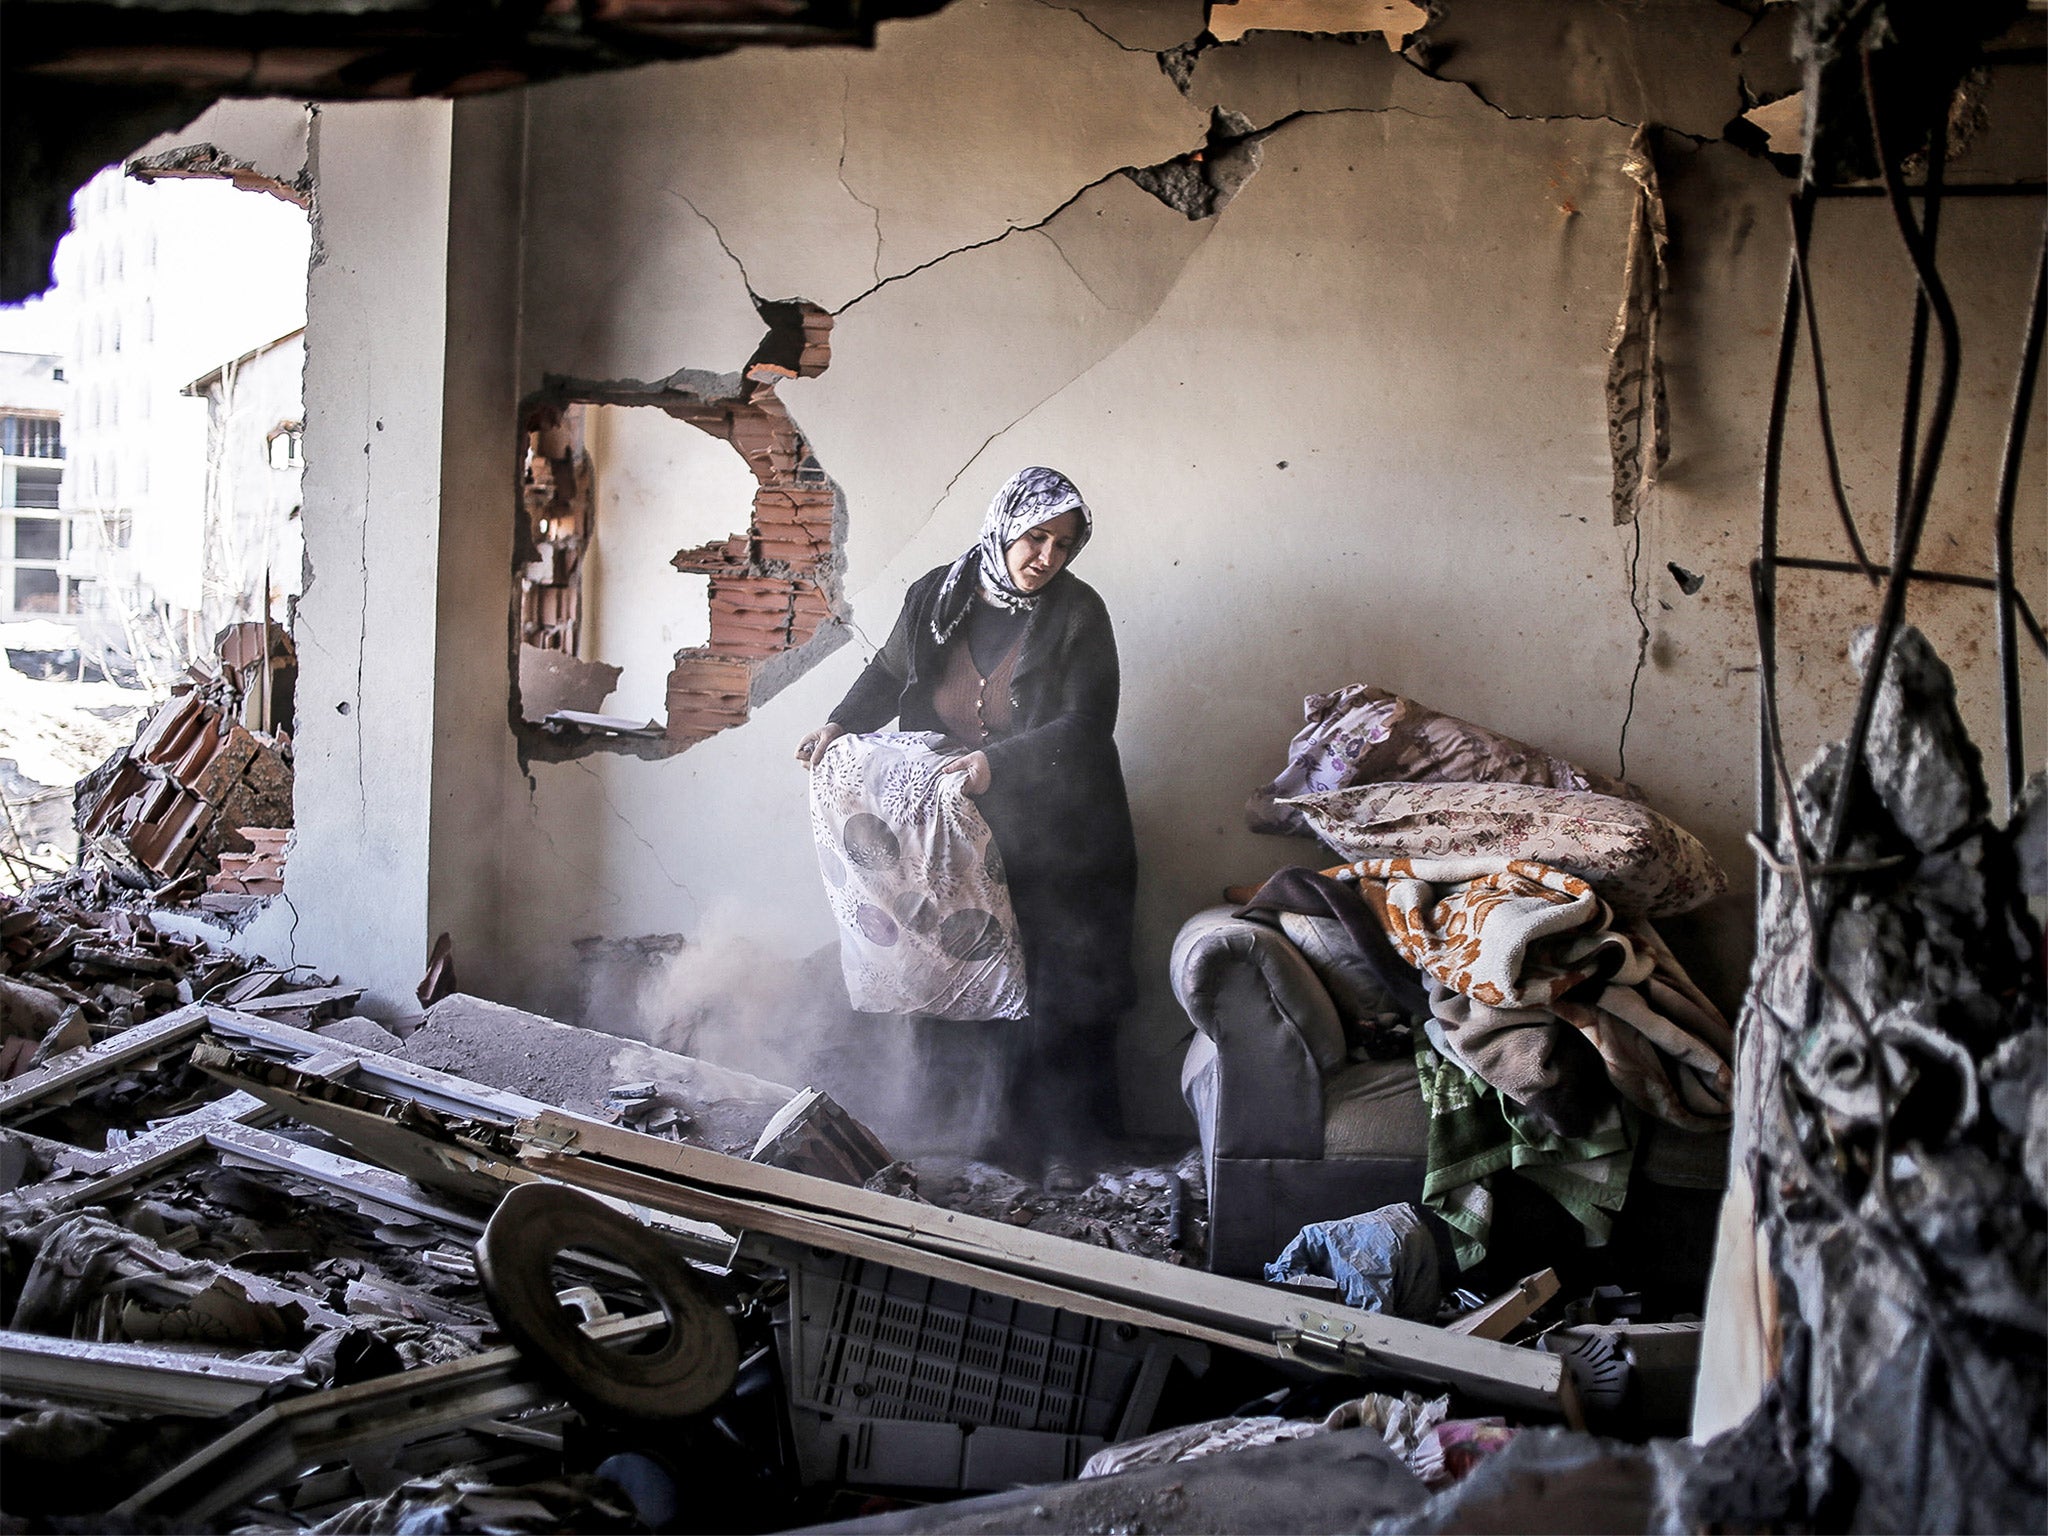 A woman inspects her belongings in her ruined home in Cizre. Turkish authorities have scaled down a 24-hour curfew imposed on the mainly Kurdish town (Getty_